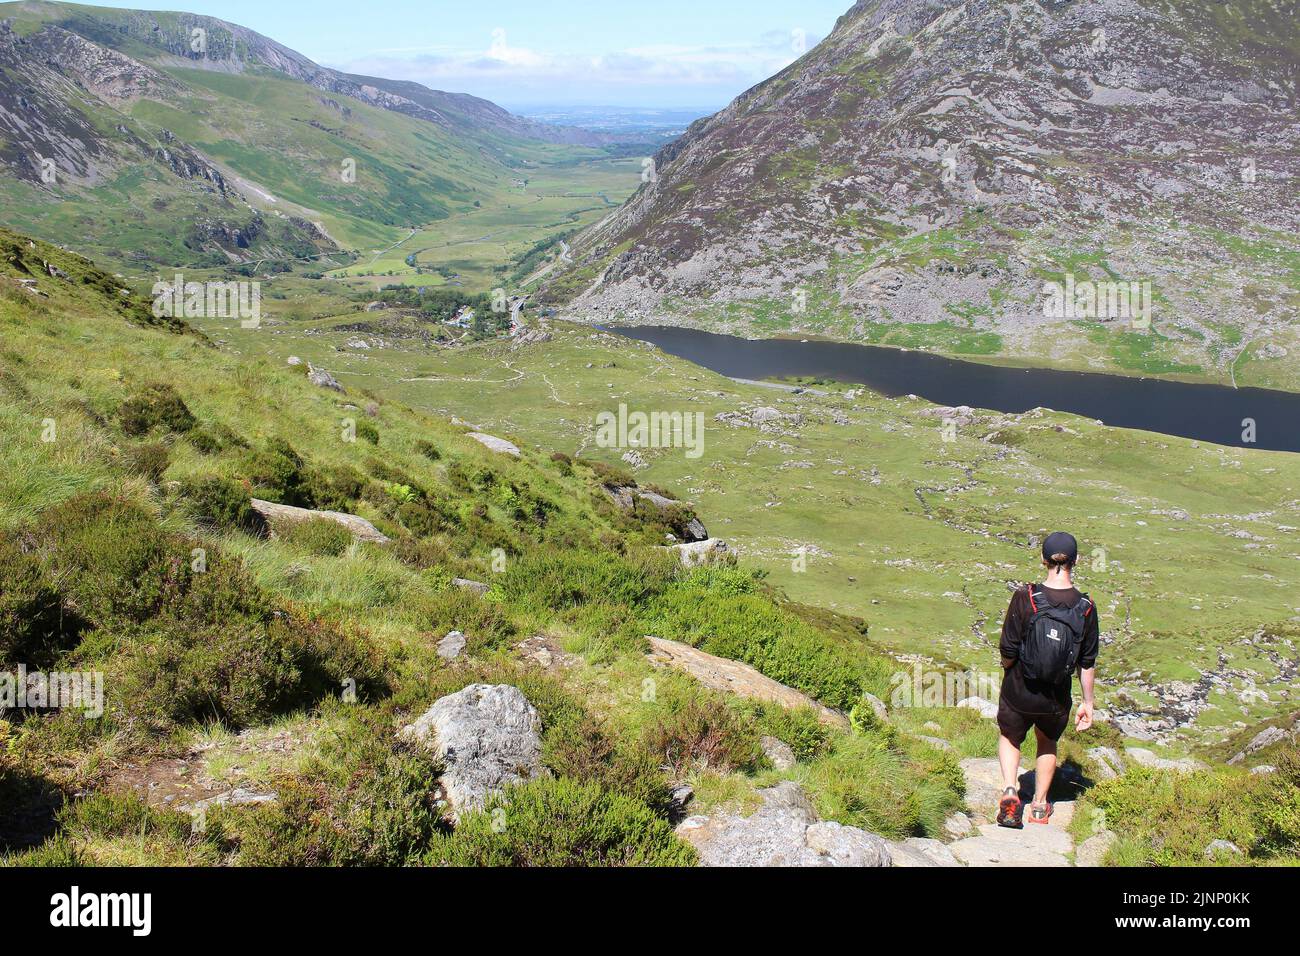 Descending The Track From Llyn Bochlwyd Toward Llyn Ogwen With the Nant Francon Valley In The Distance Stock Photo